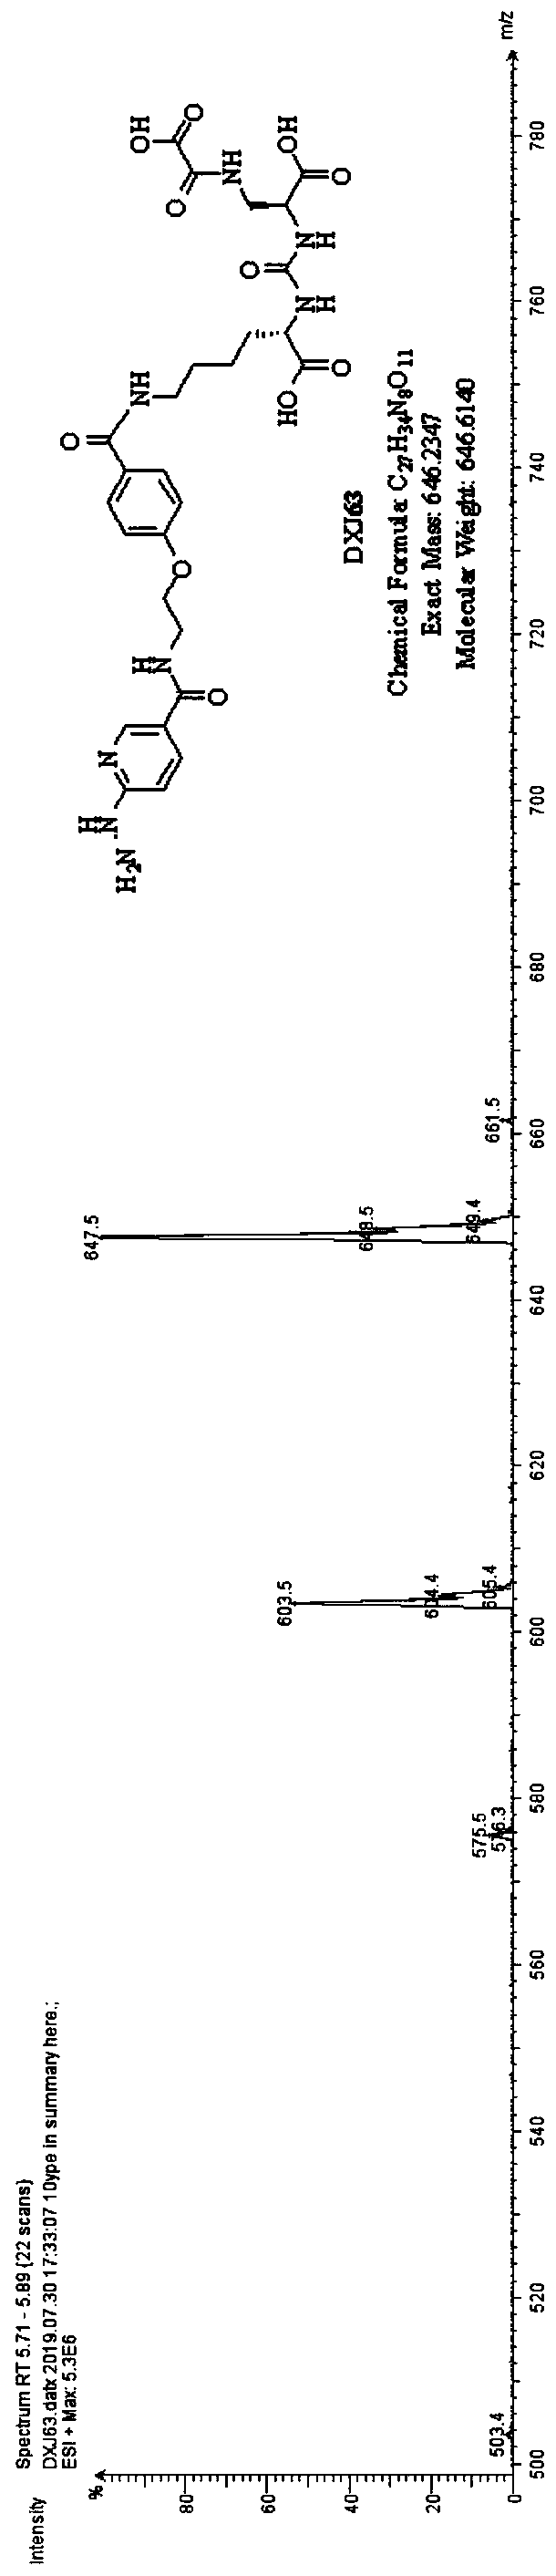 PSMA inhibitor, application thereof and PSMA-targeting nuclide imaging reagent